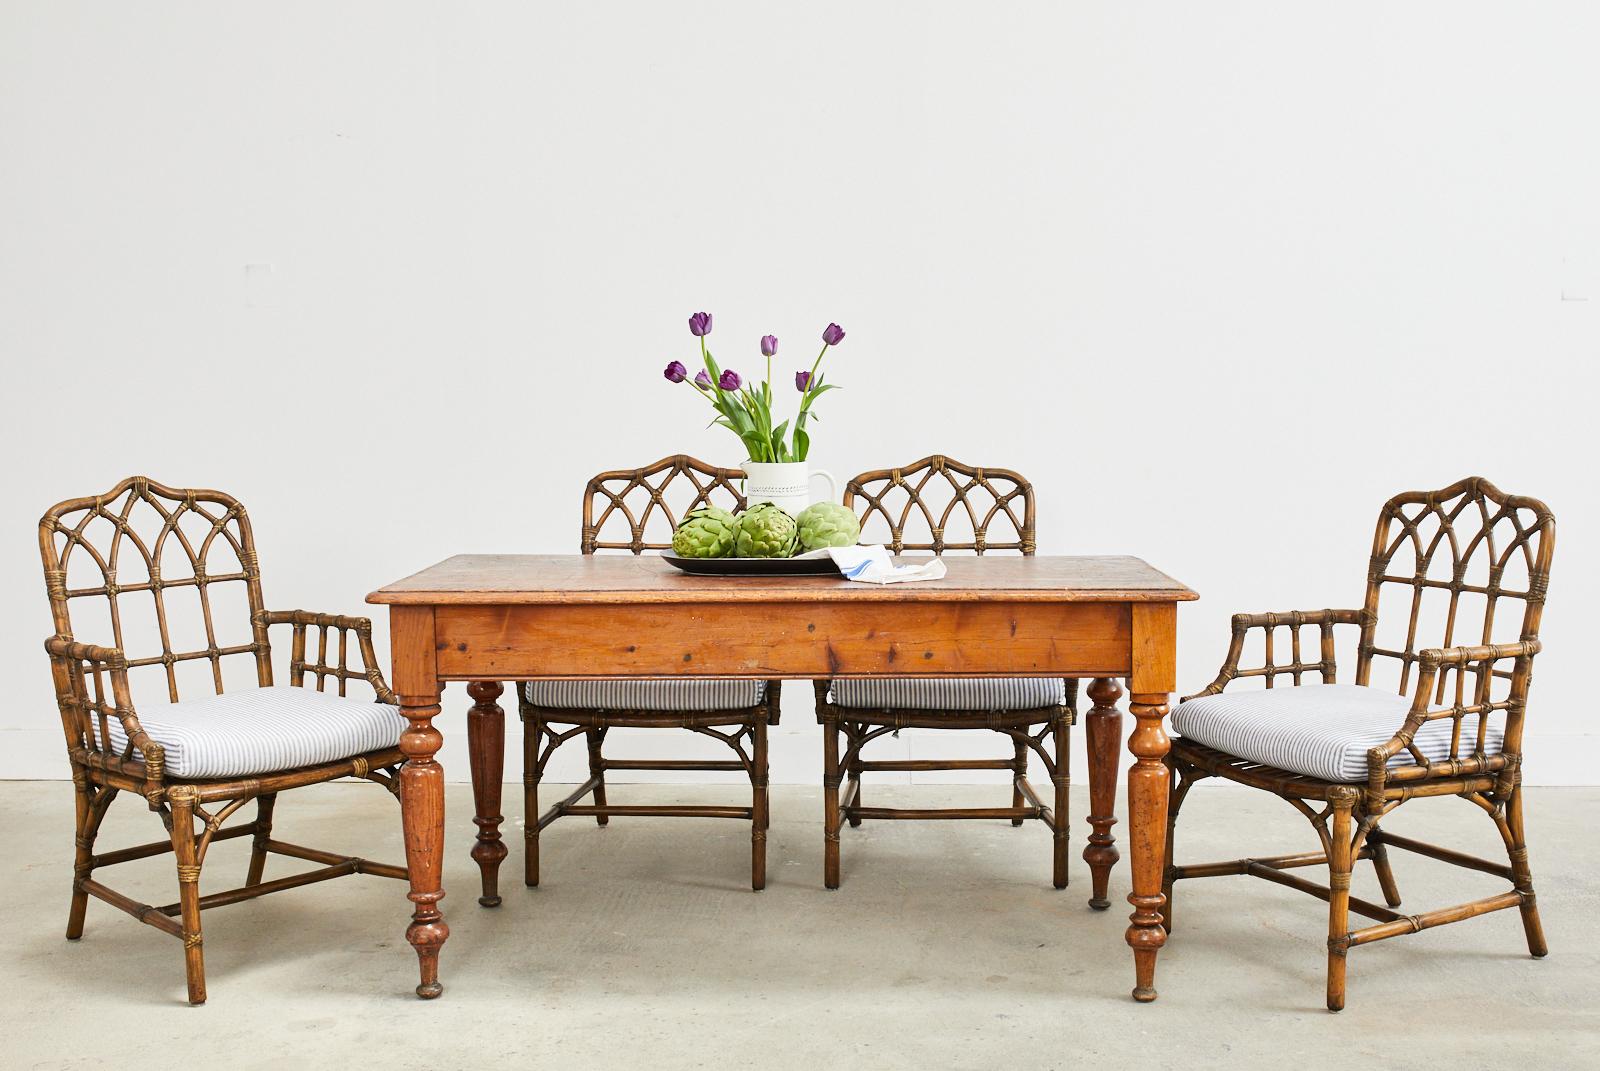 Charming country English farmhouse dining table or writing table crafted from pine. Late 19th-century farm table has a storage drawer on one end with a round wood pull. The rectangular top has a molded edge and a beautifully worn and weathered top.